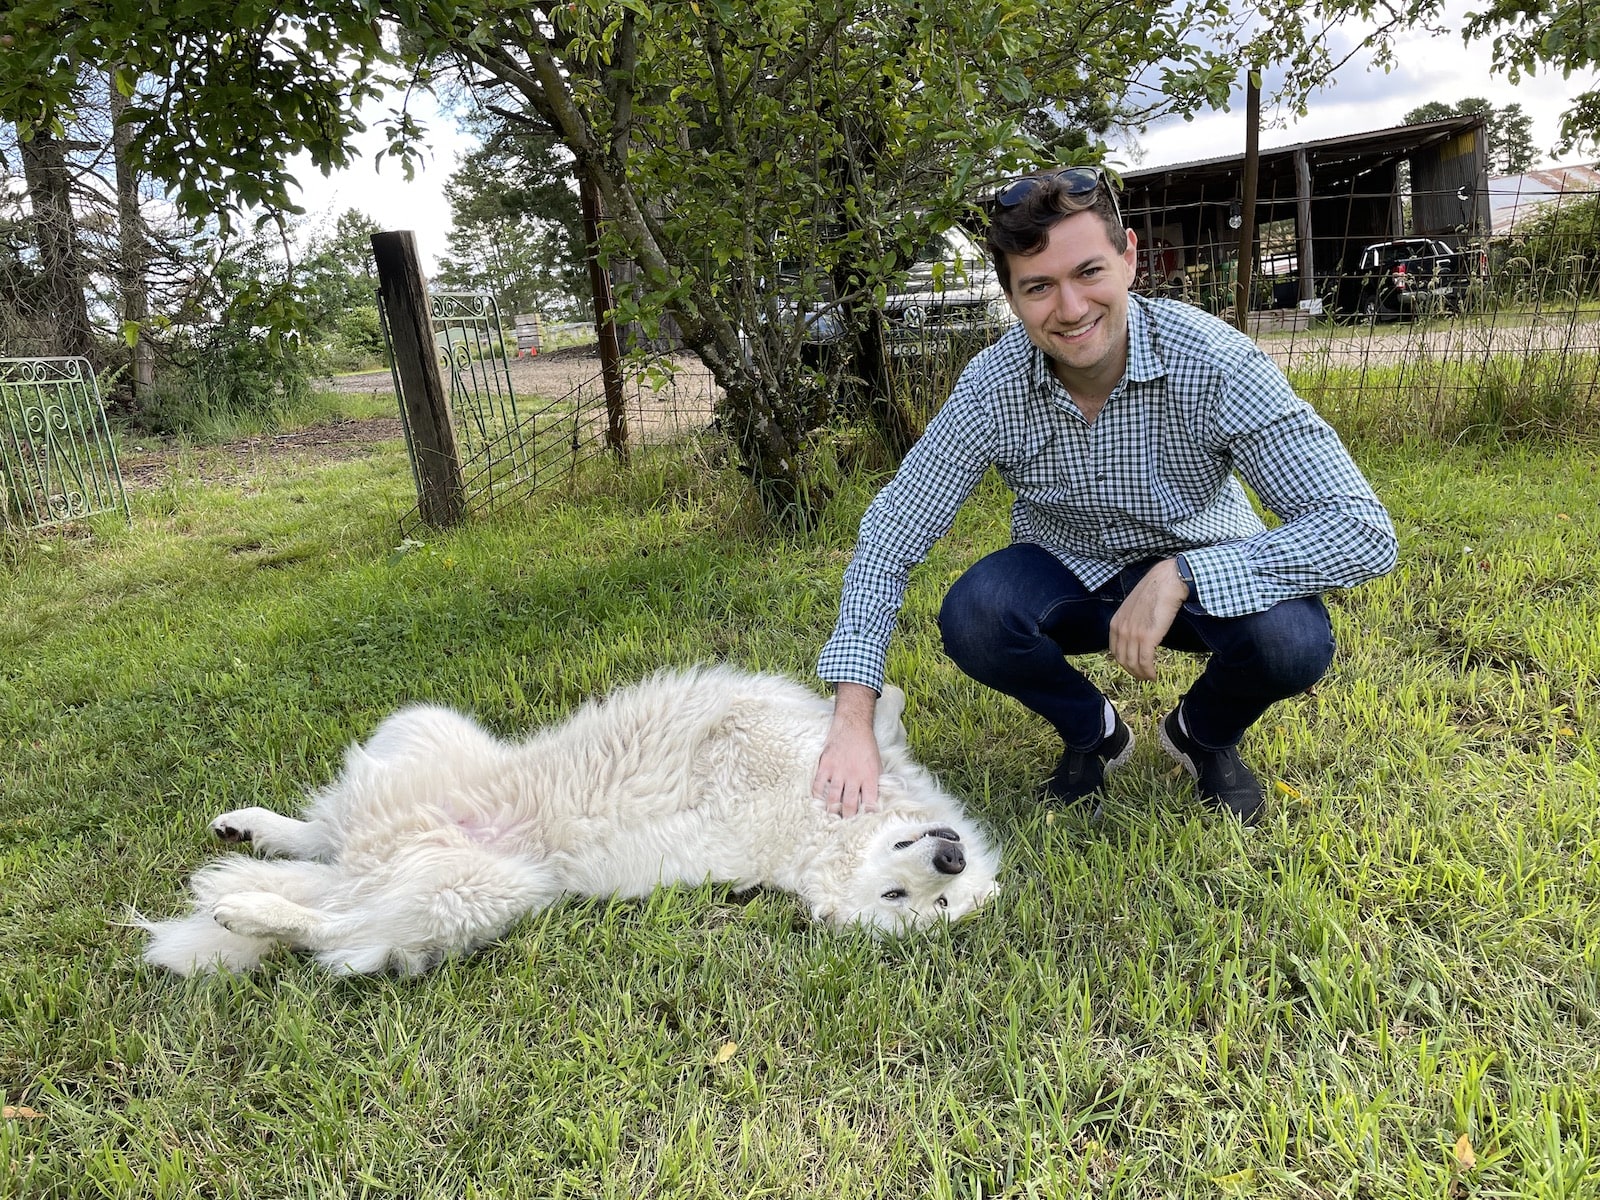 Nick, a white man with dark hair, with a white maremma dog on its back. He is smiling and petting the dog